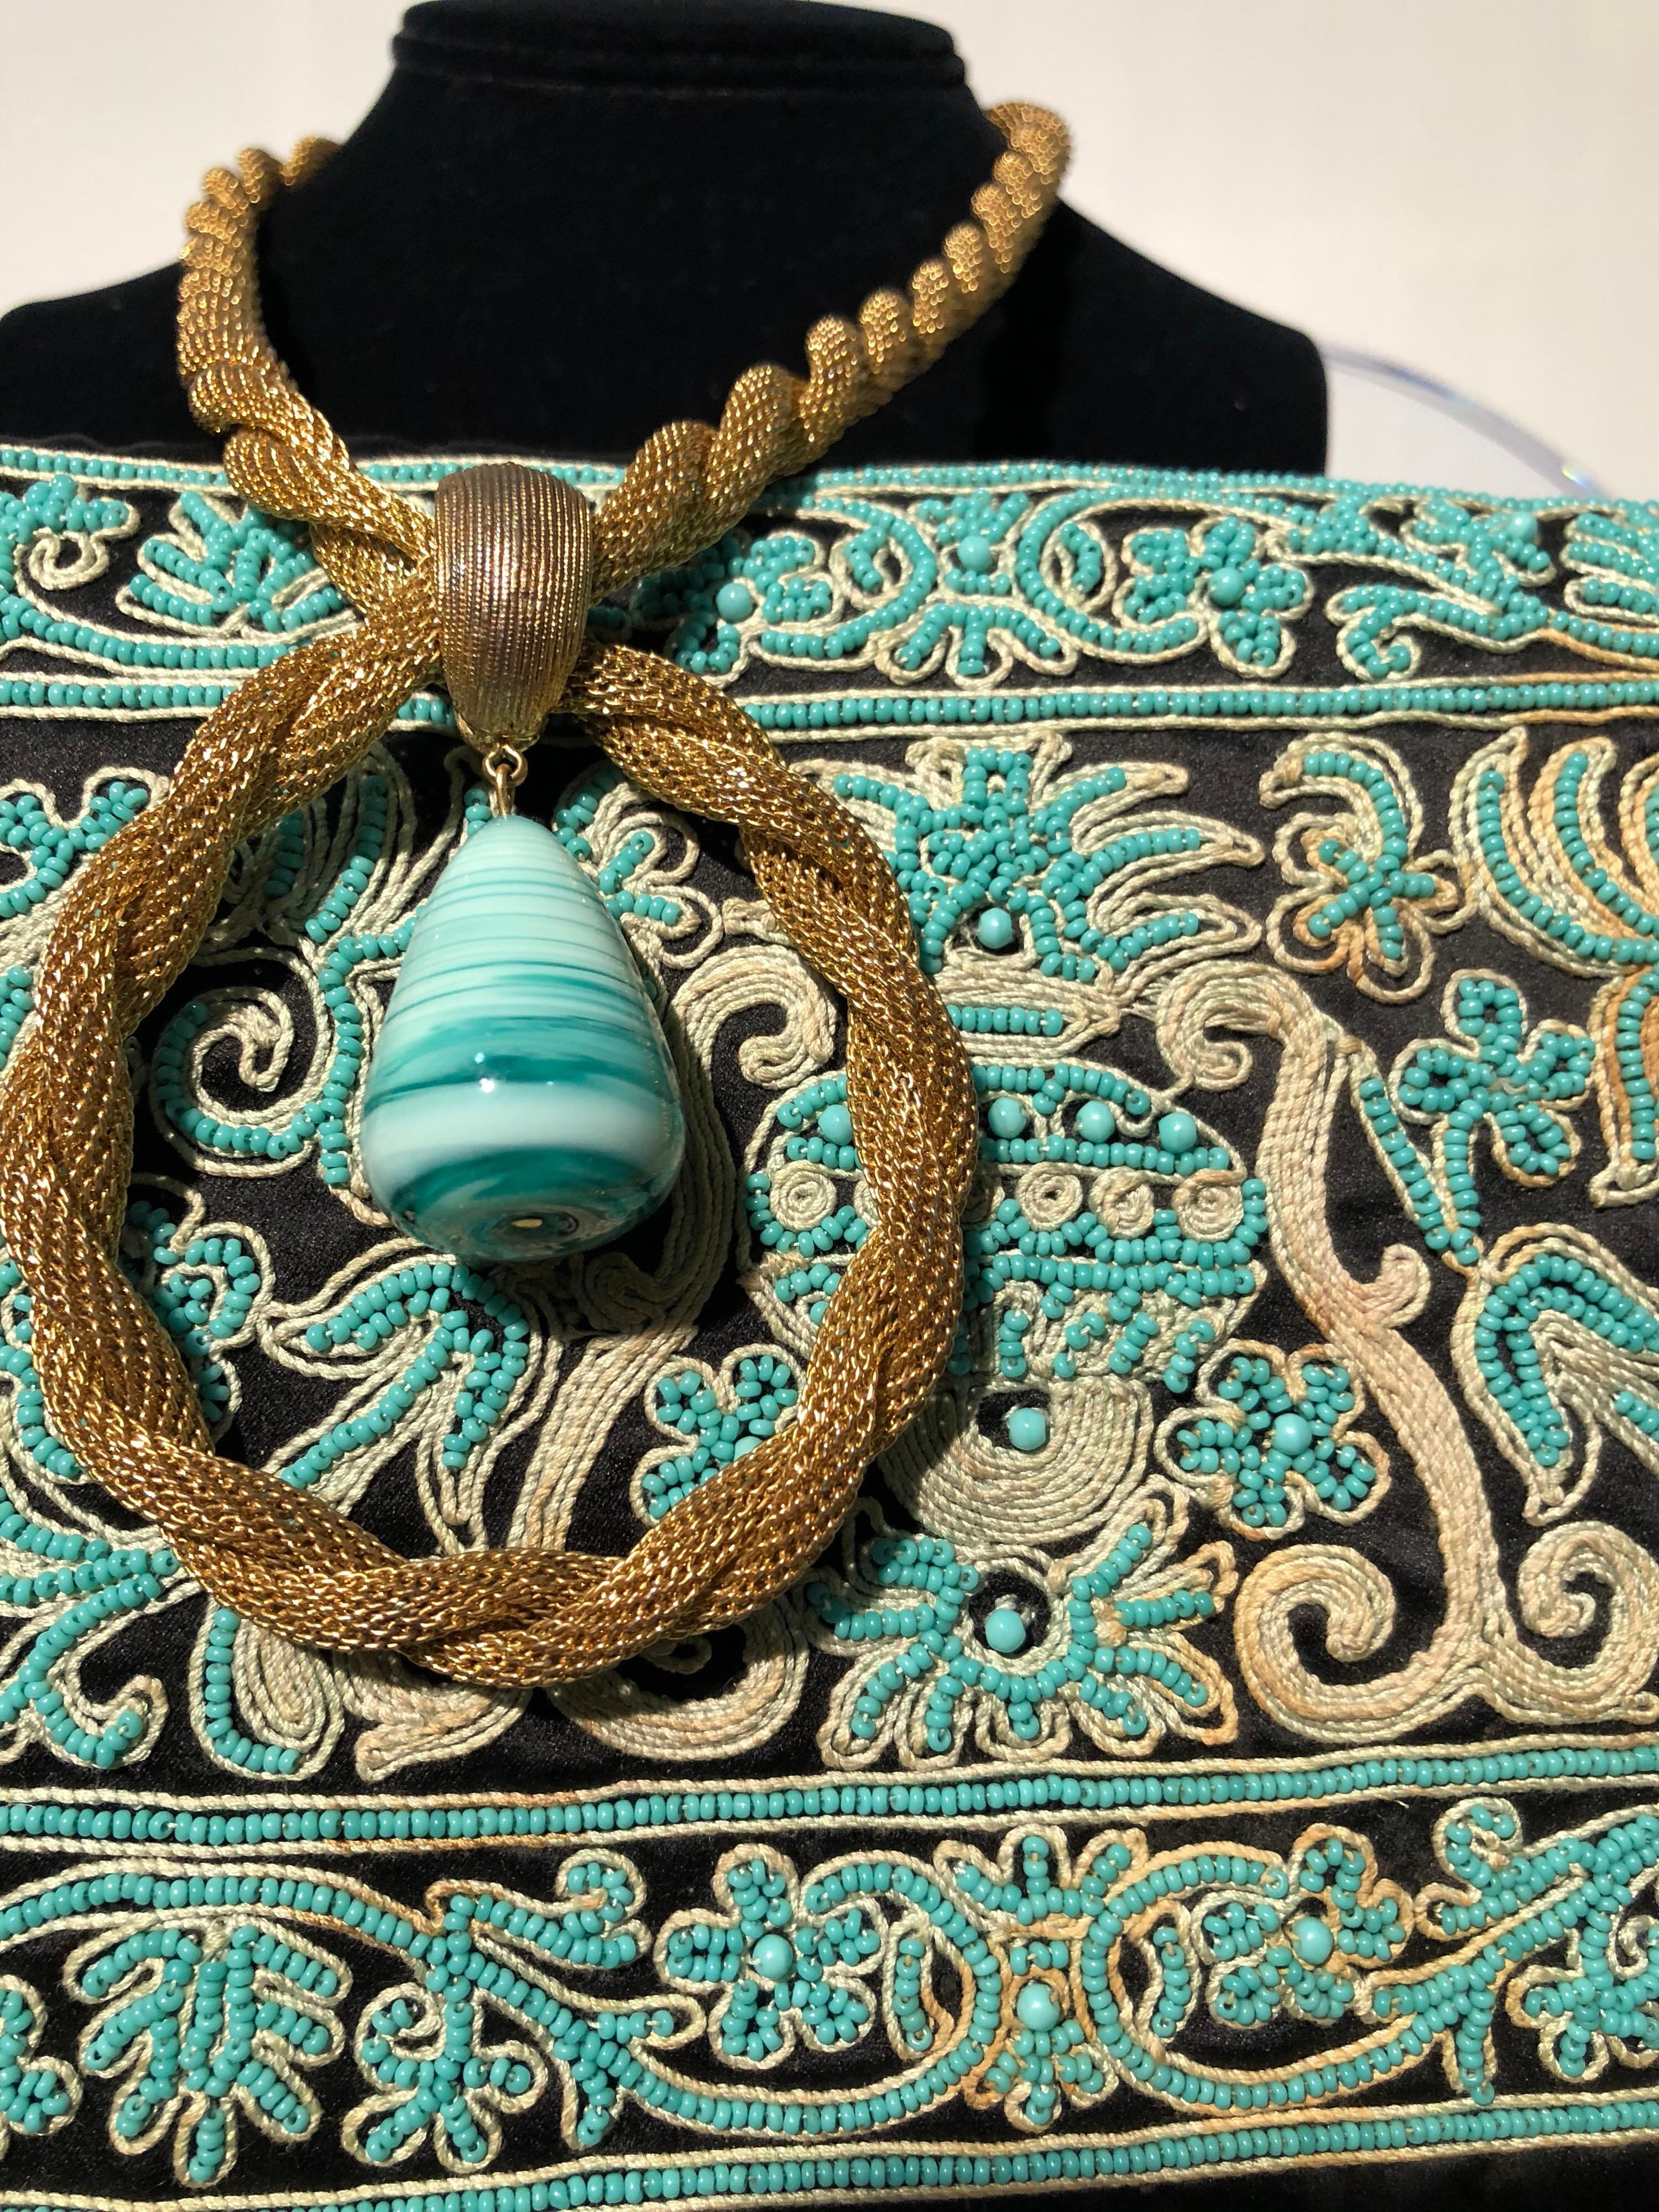 A lovely 1940s Henry Rosenfeld black satin envelope clutch purse with front heavily embroidered in traditional Indian style in turquoise and gold cording. A coordinating gold-tone metal rope necklace with slang glass drop pendant is included. 